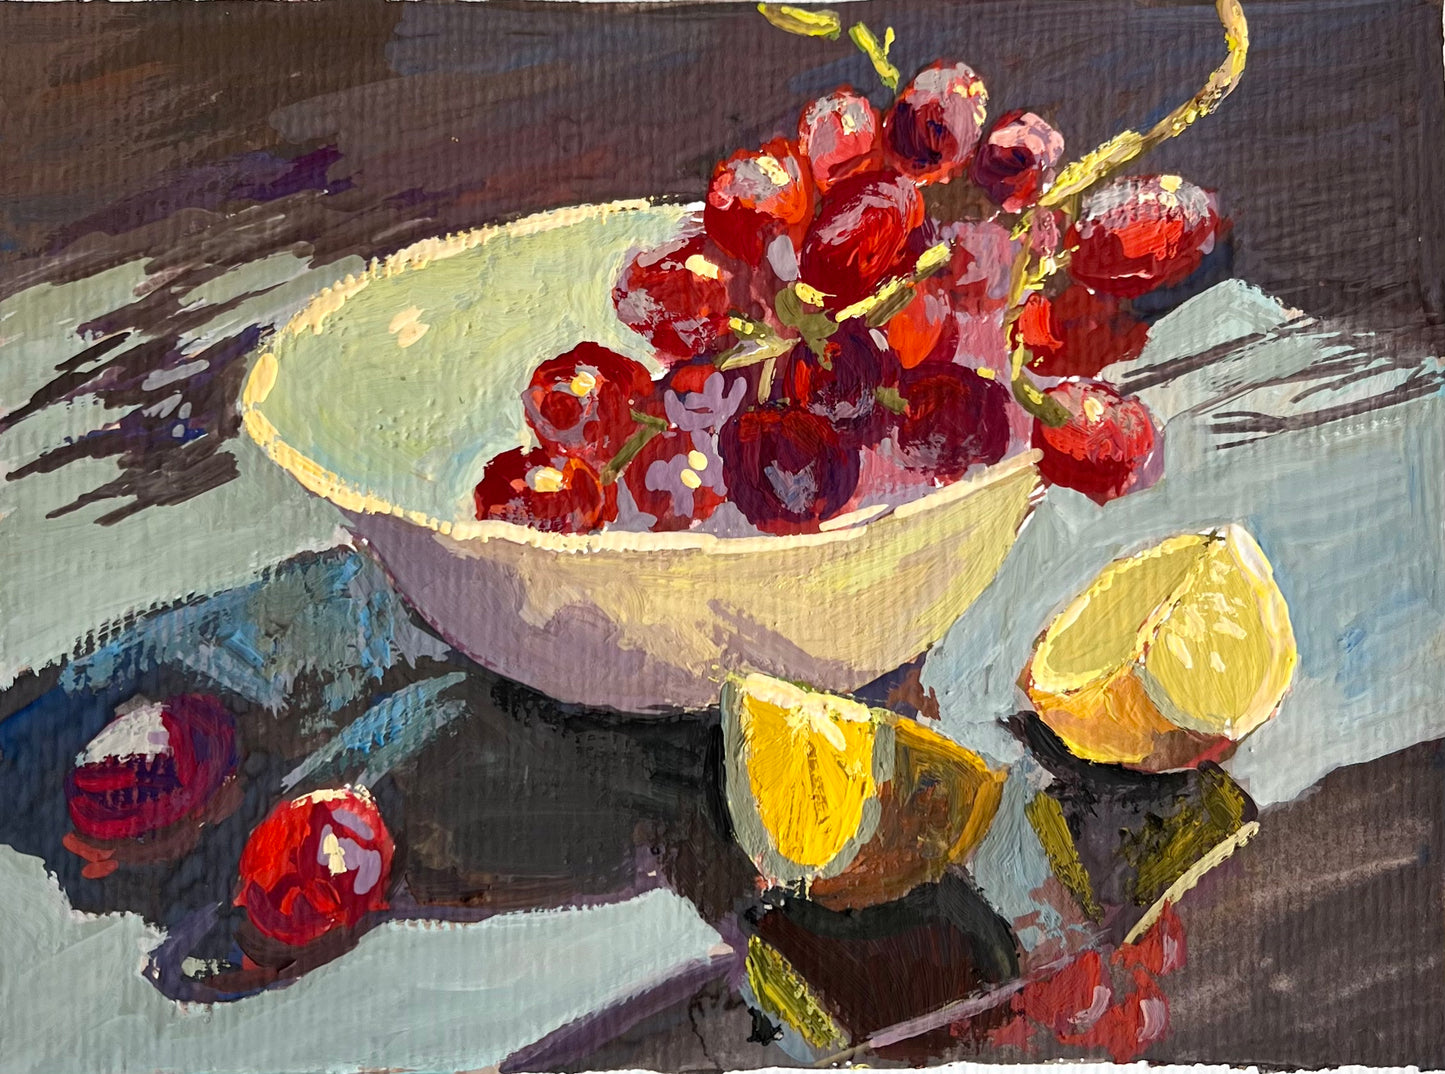 Gouache Painting: Grapes and Lemons under the sun